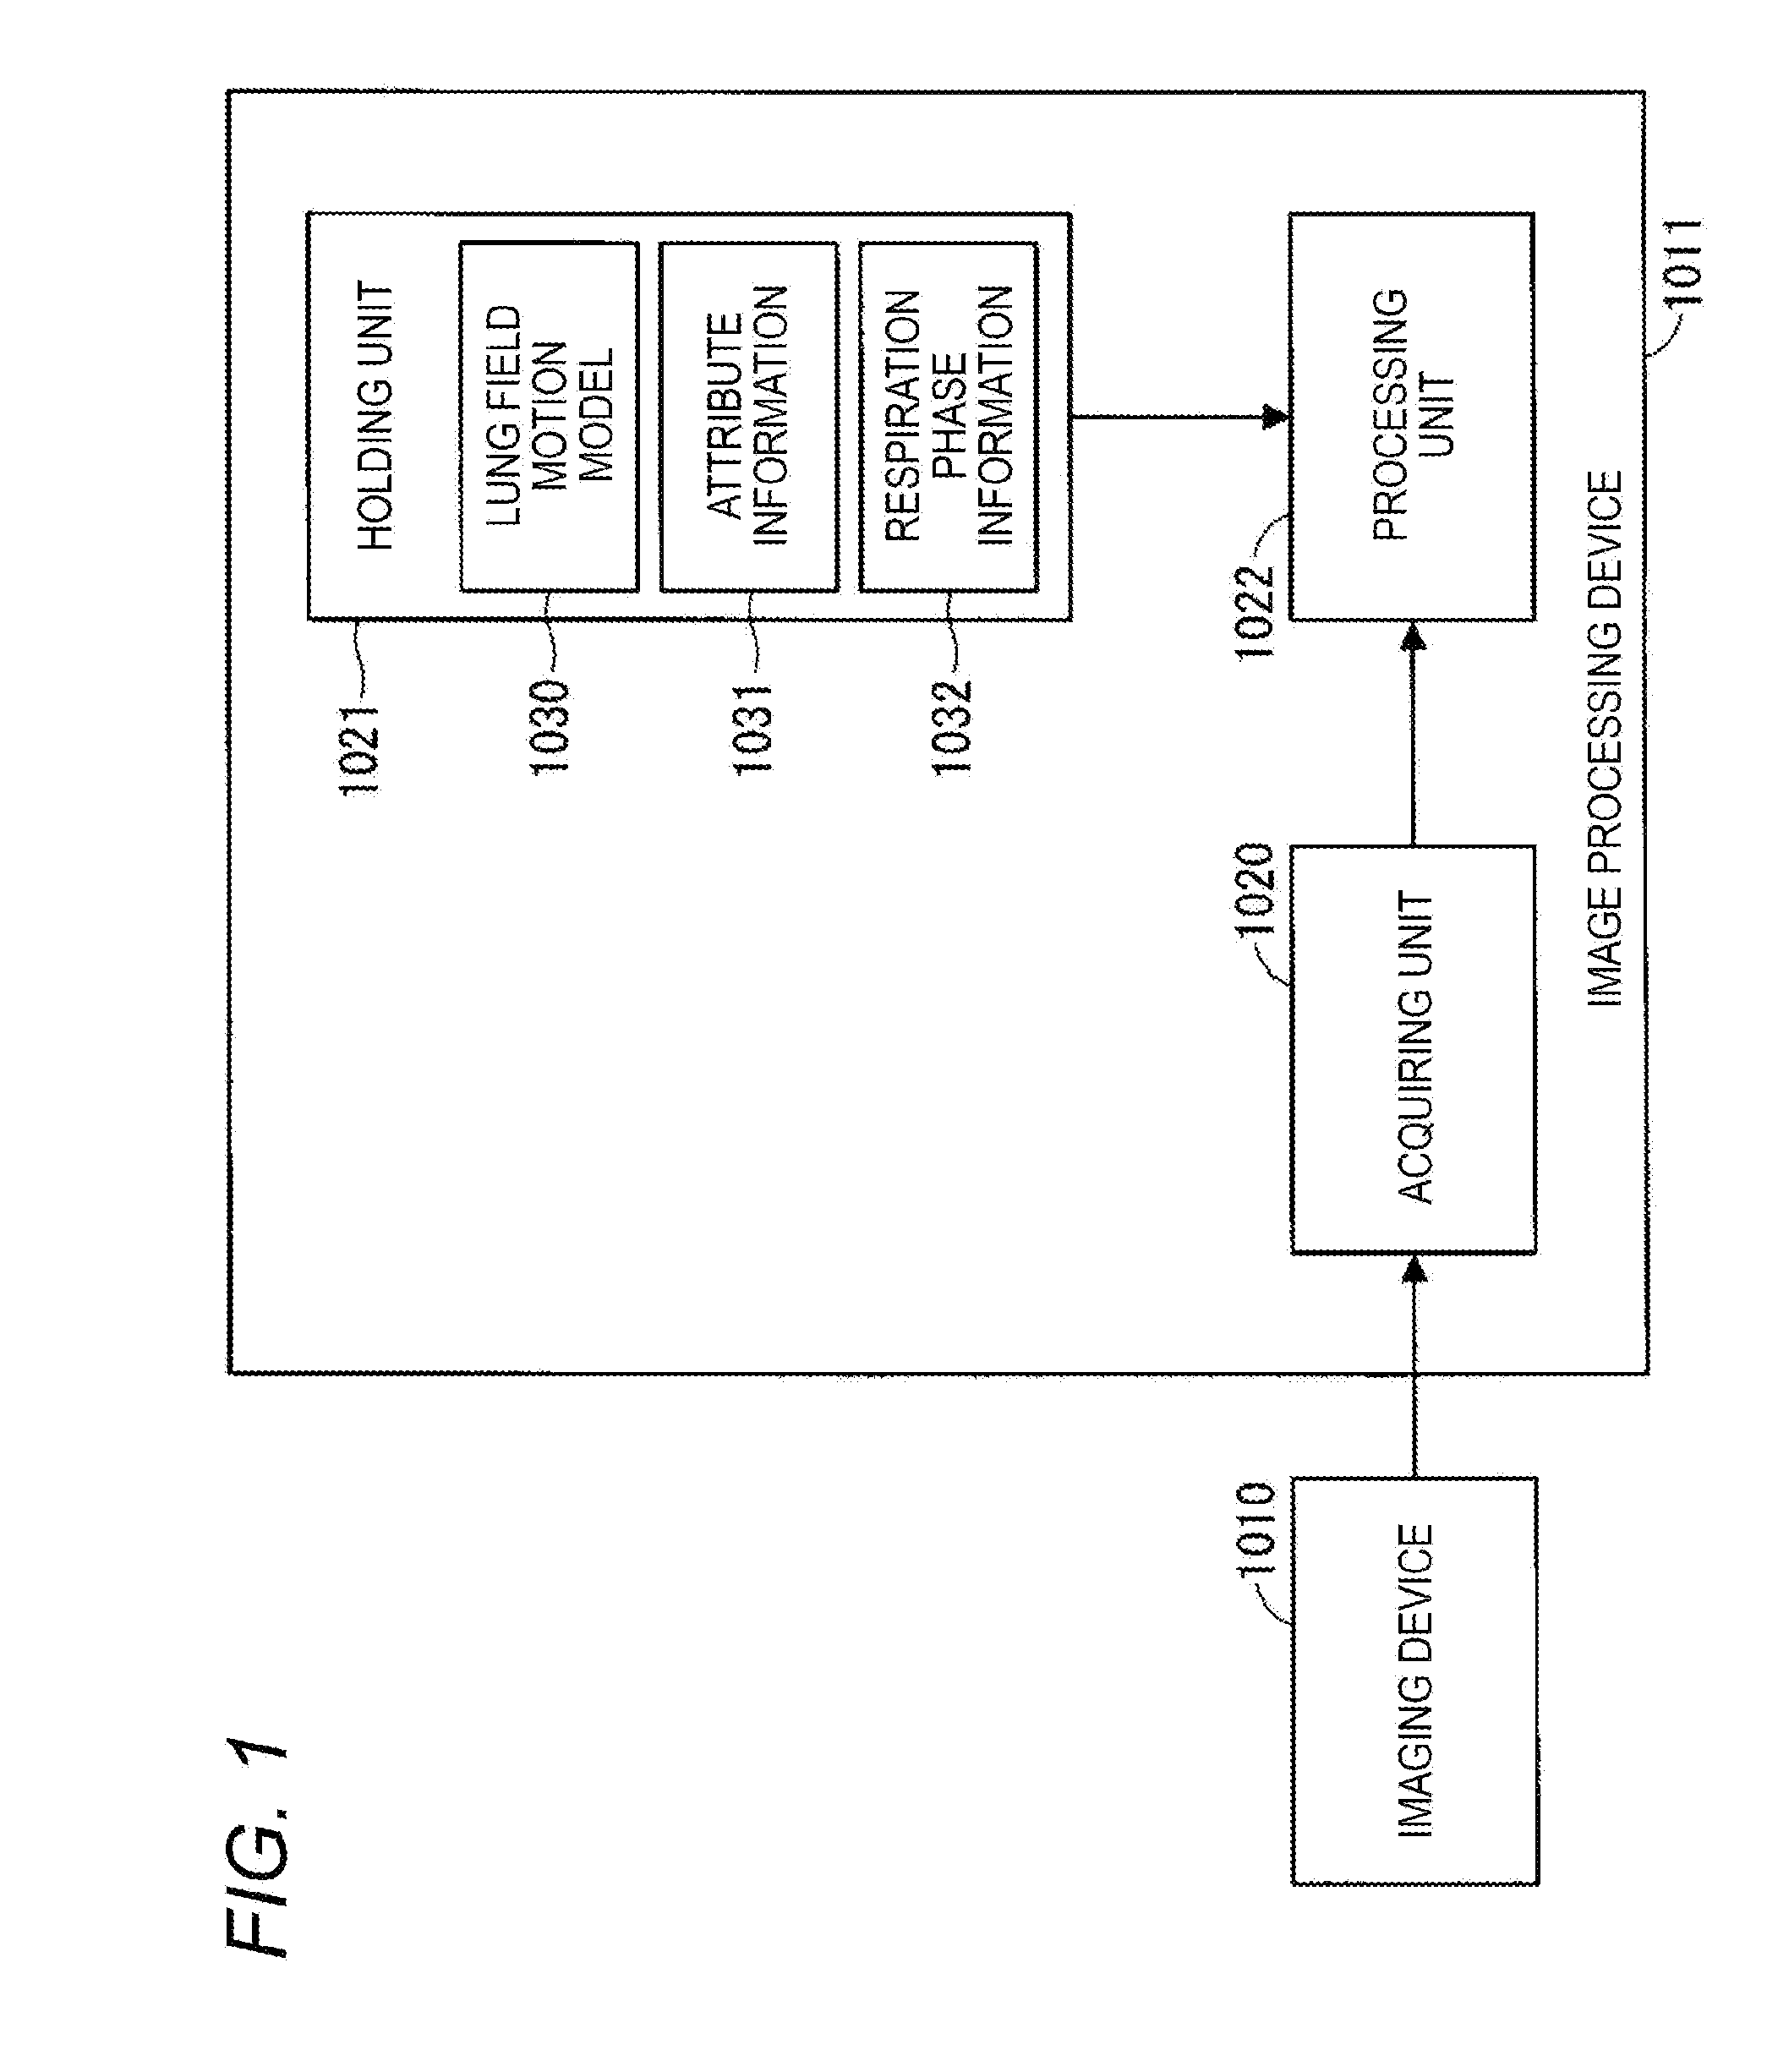 Image processing device, imaging system, and image processing program